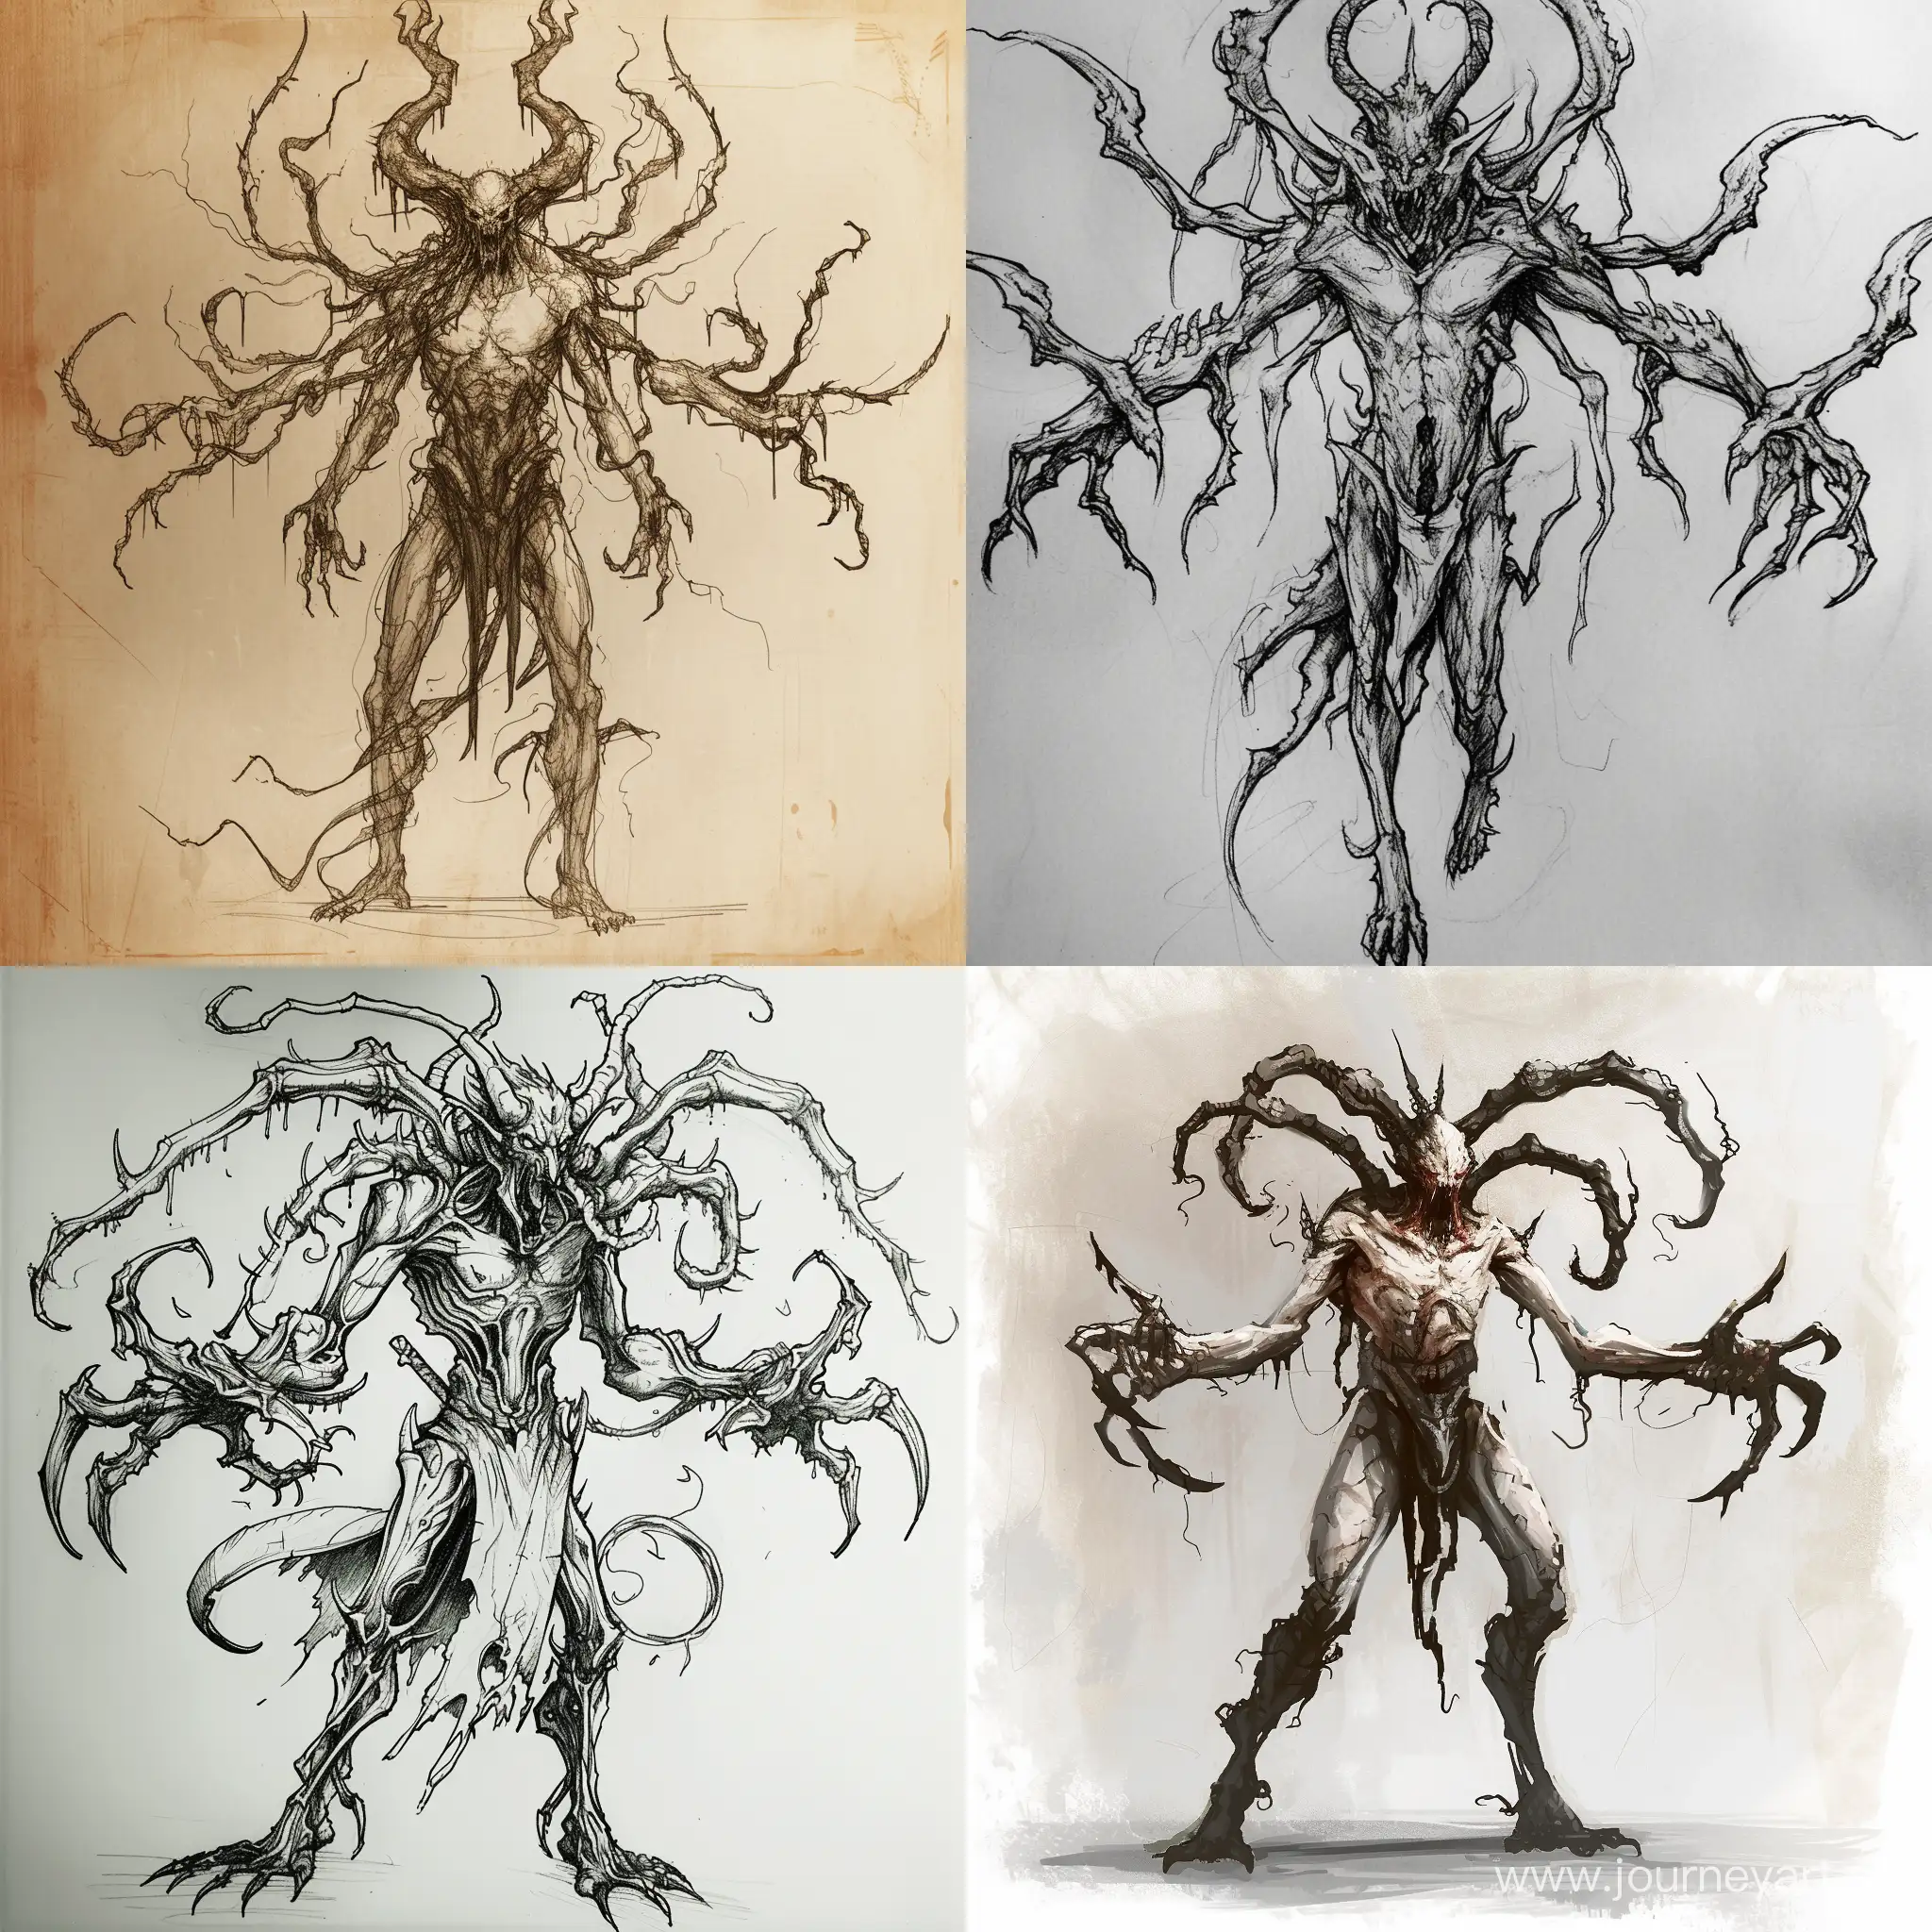 Realistic-4Meter-Tall-MultiArmed-Demon-for-Game